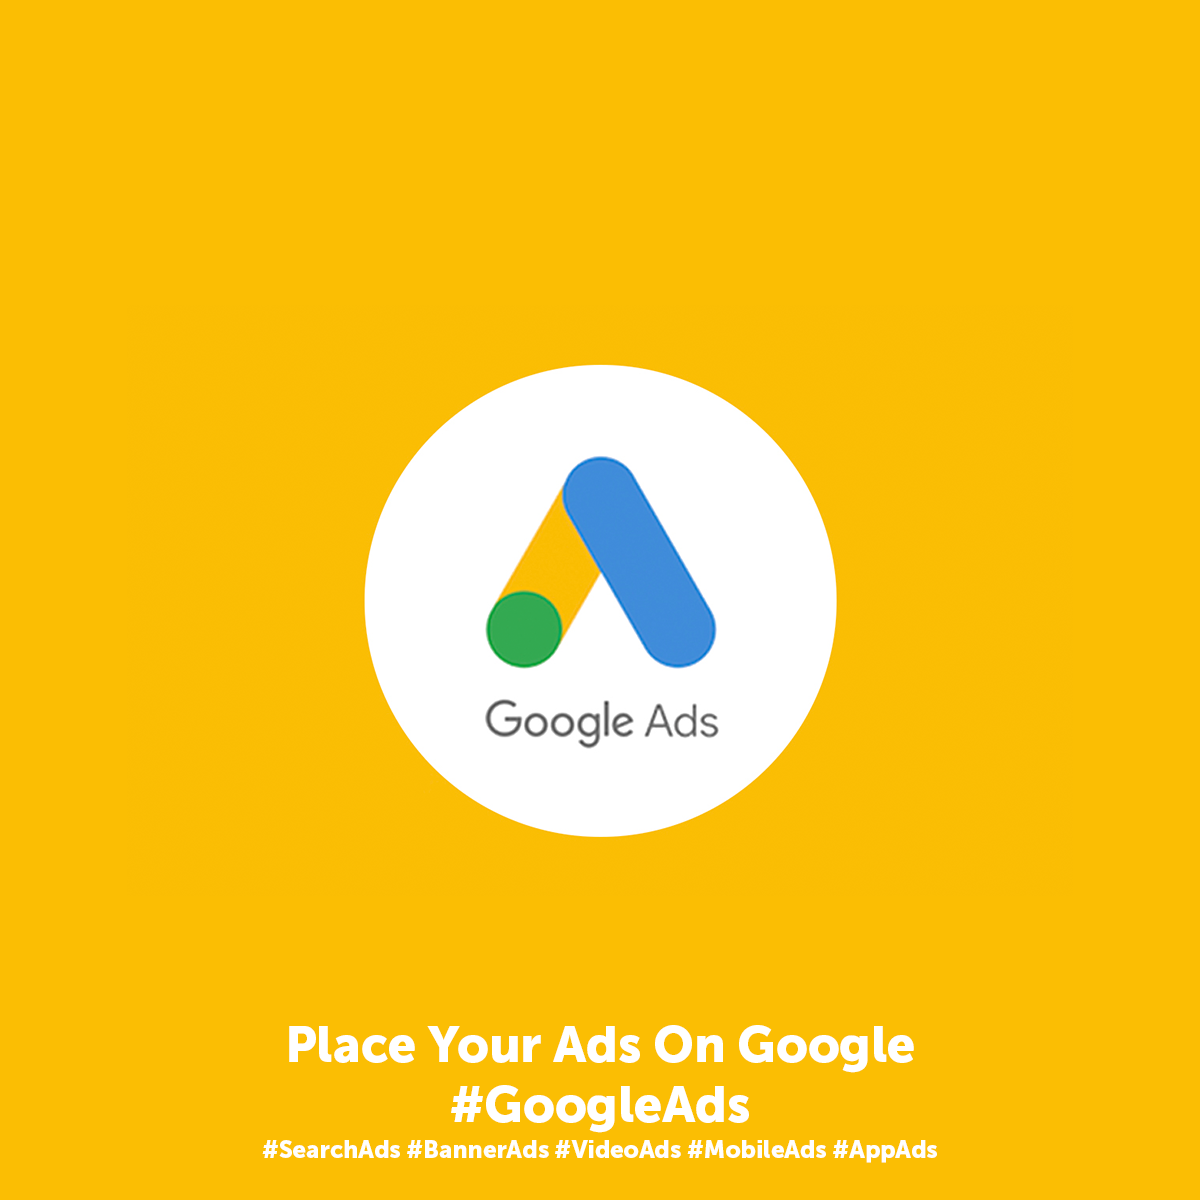 Optimisation score is now available in the Google Ads mobile app